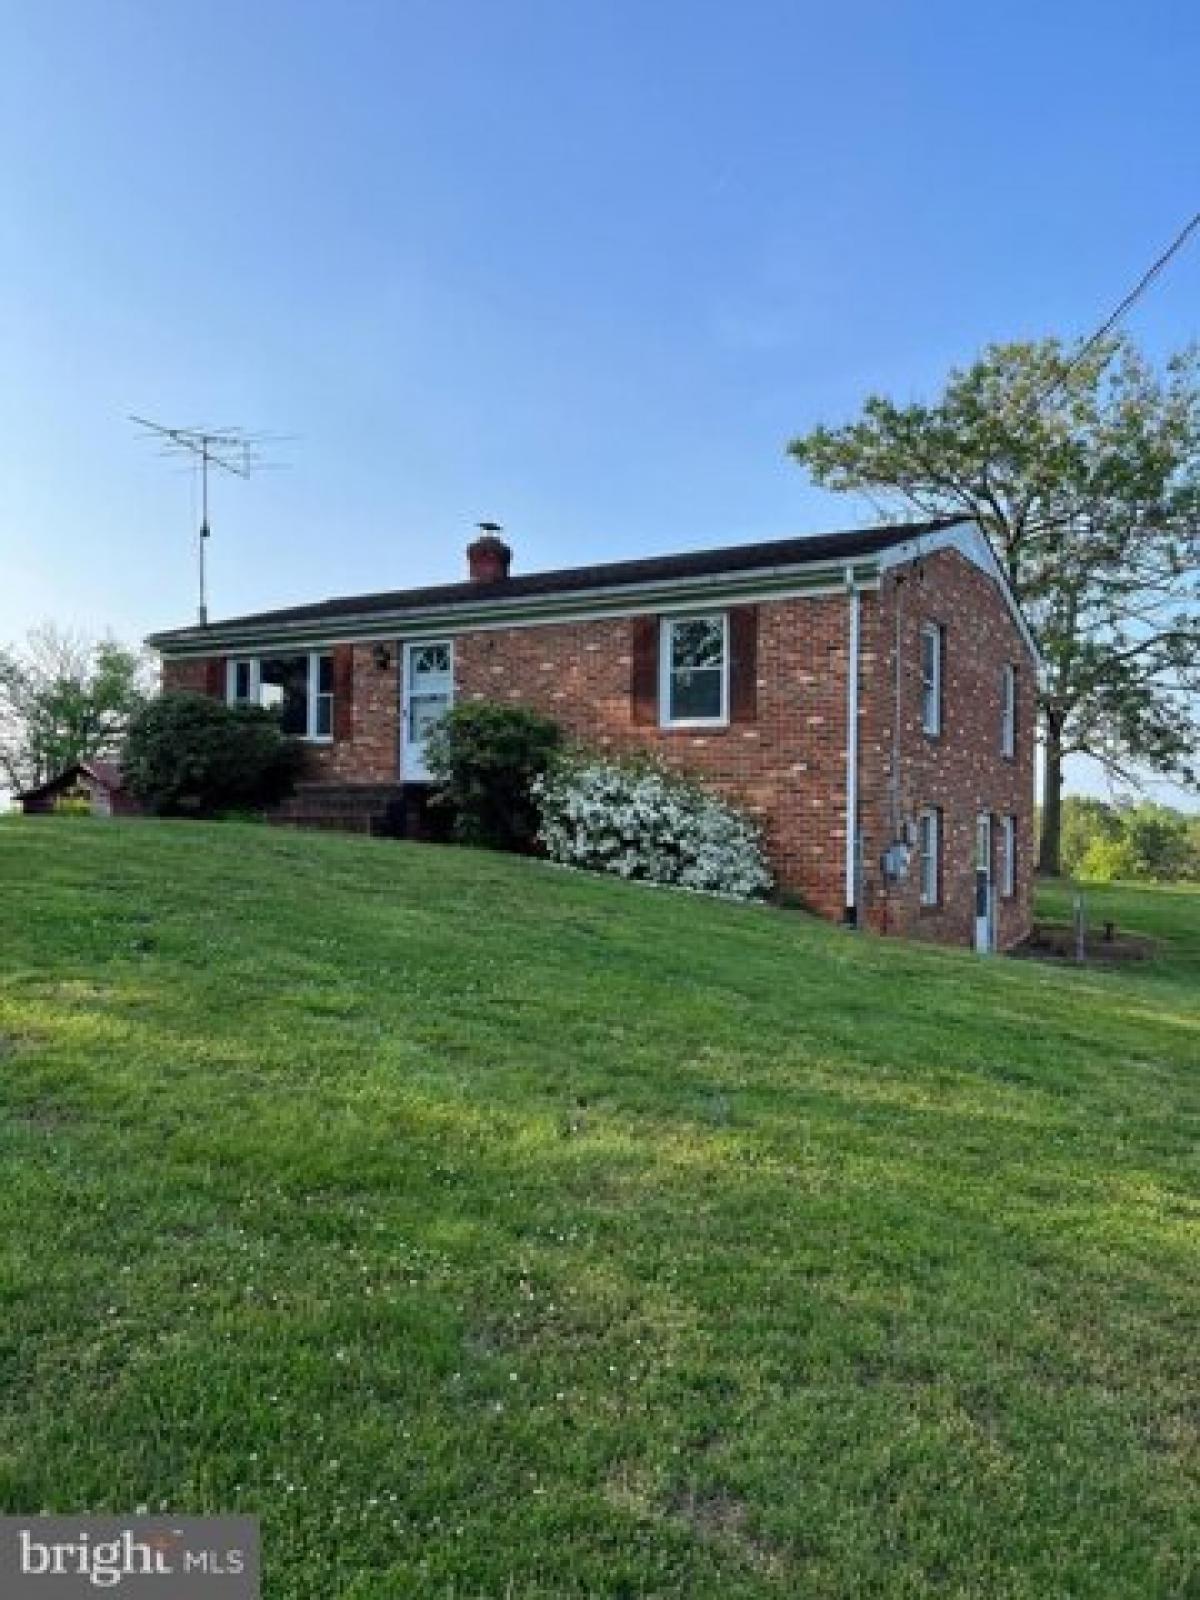 Picture of Home For Sale in Madison, Virginia, United States